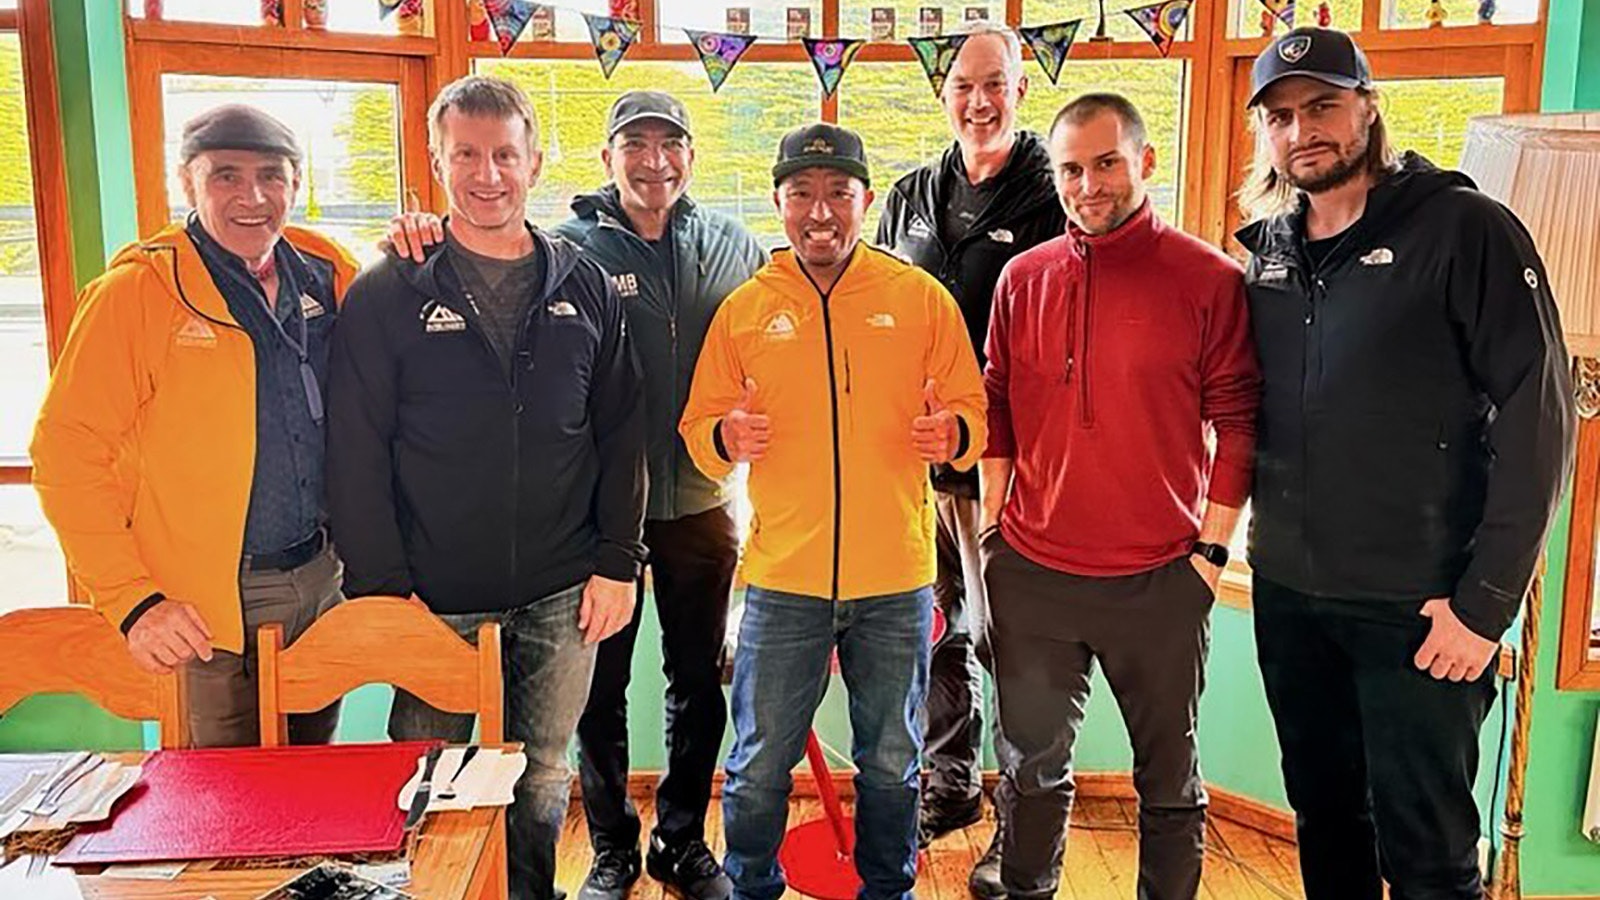 Dr. Joe McGinley, second from left, poses with members of his climbing team in Peru, prior to heading to Antarctica.